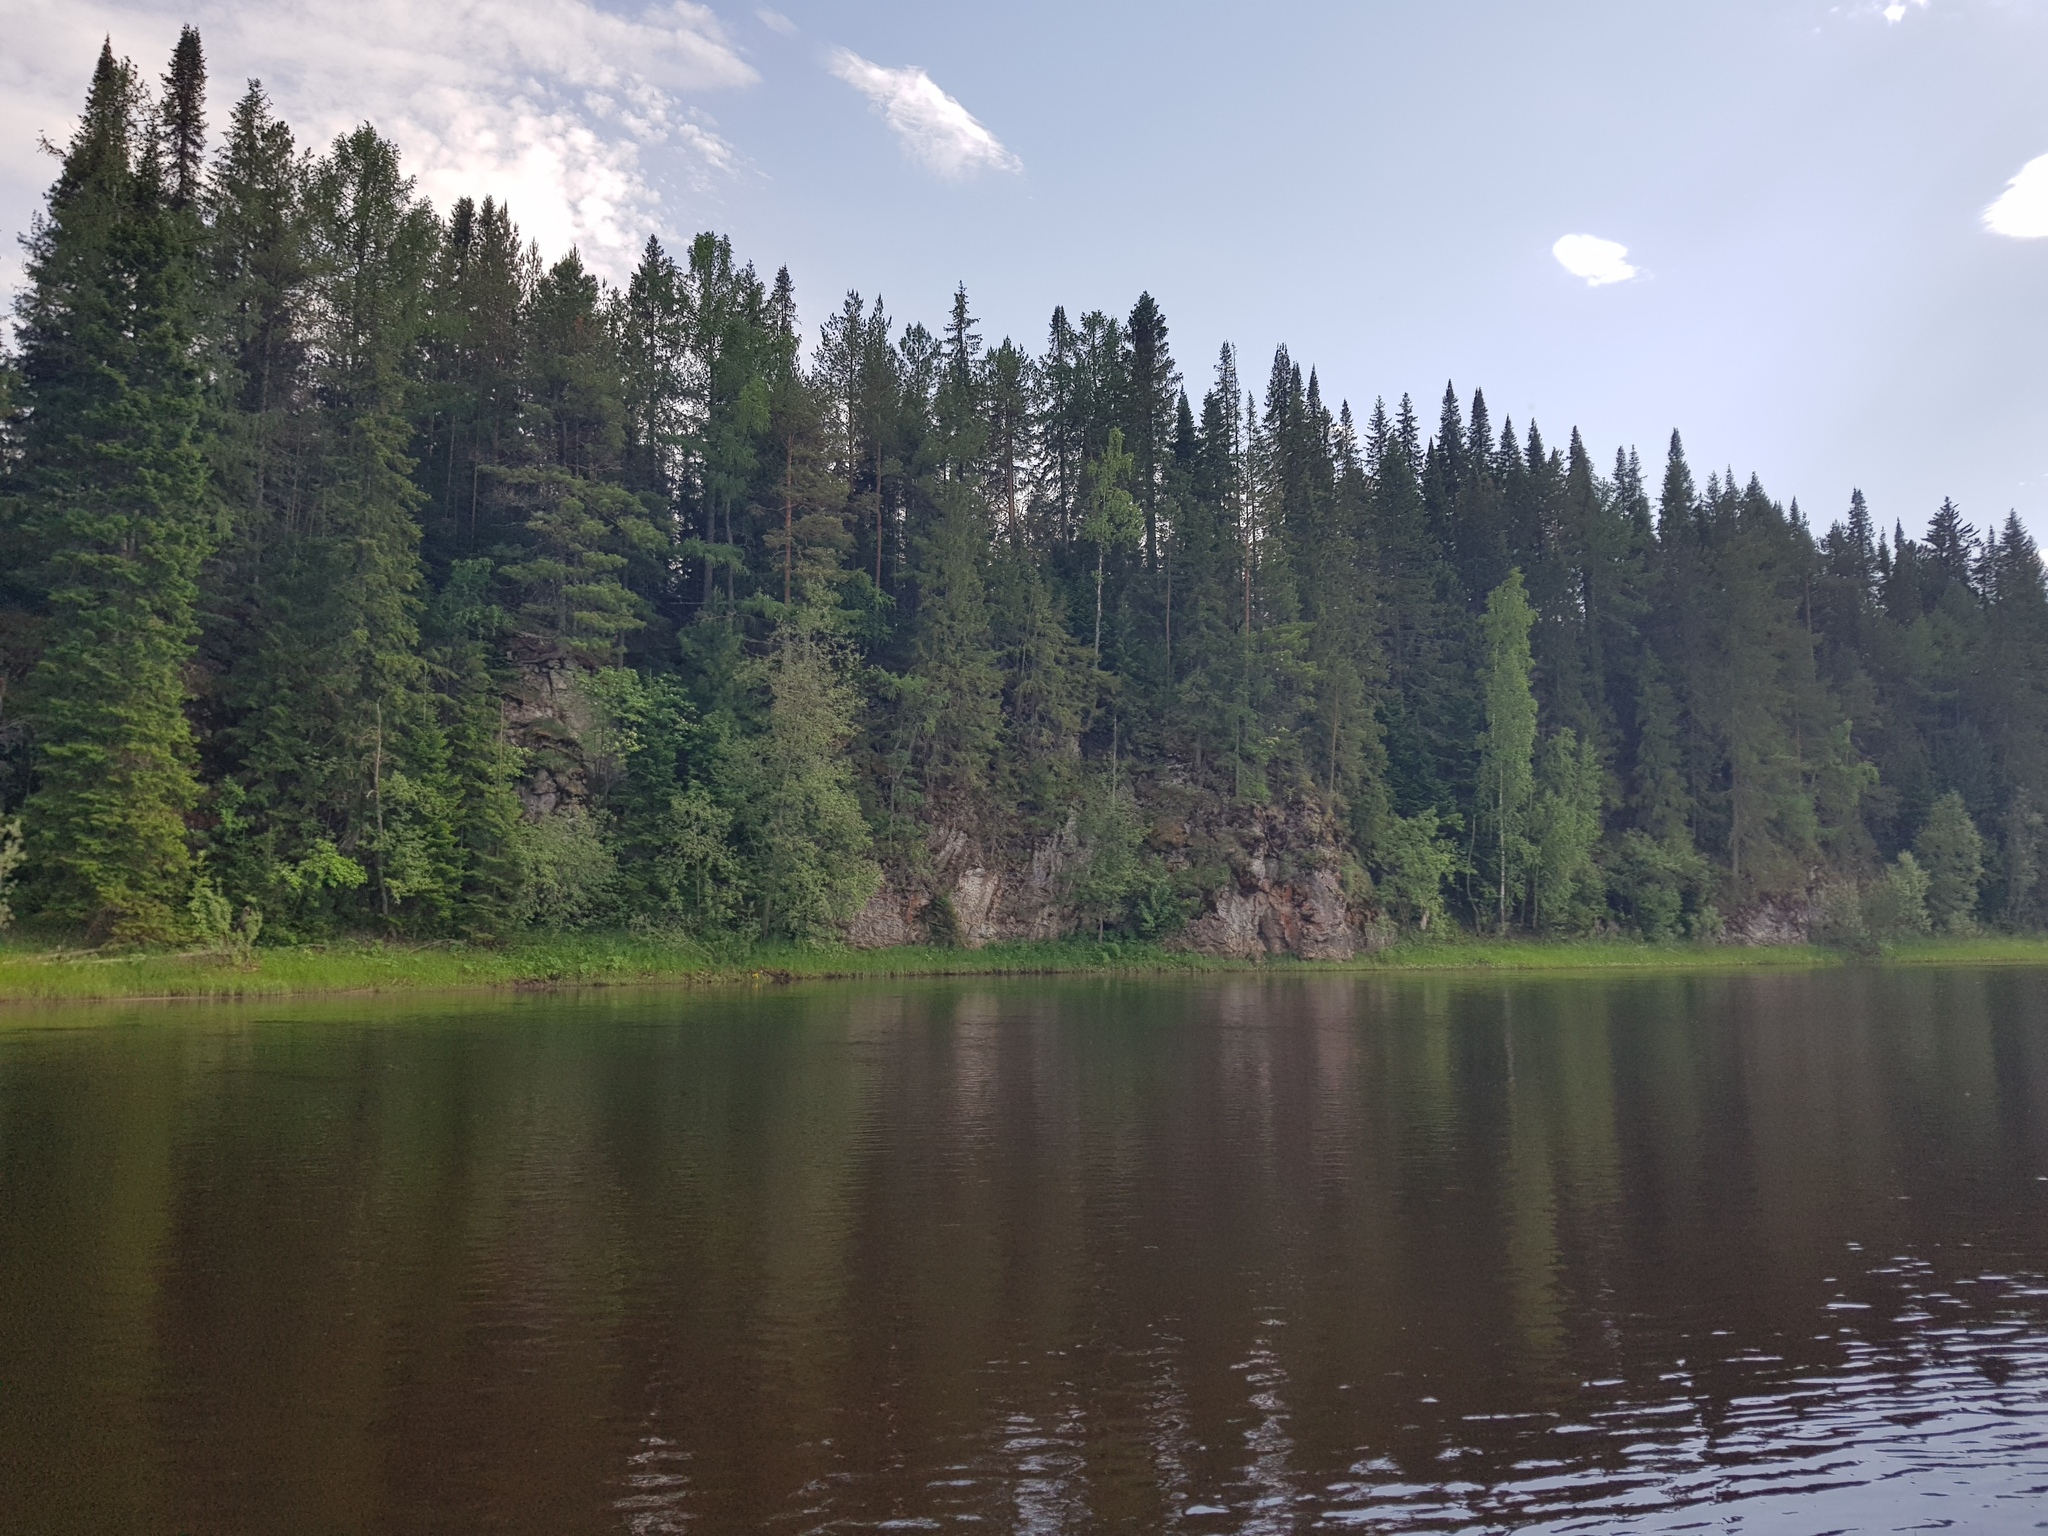 Northern Urals - My, The photo, Mobile photography, Nature, River, Forest, The mountains, Ural, Northern Ural, Sky, Clouds